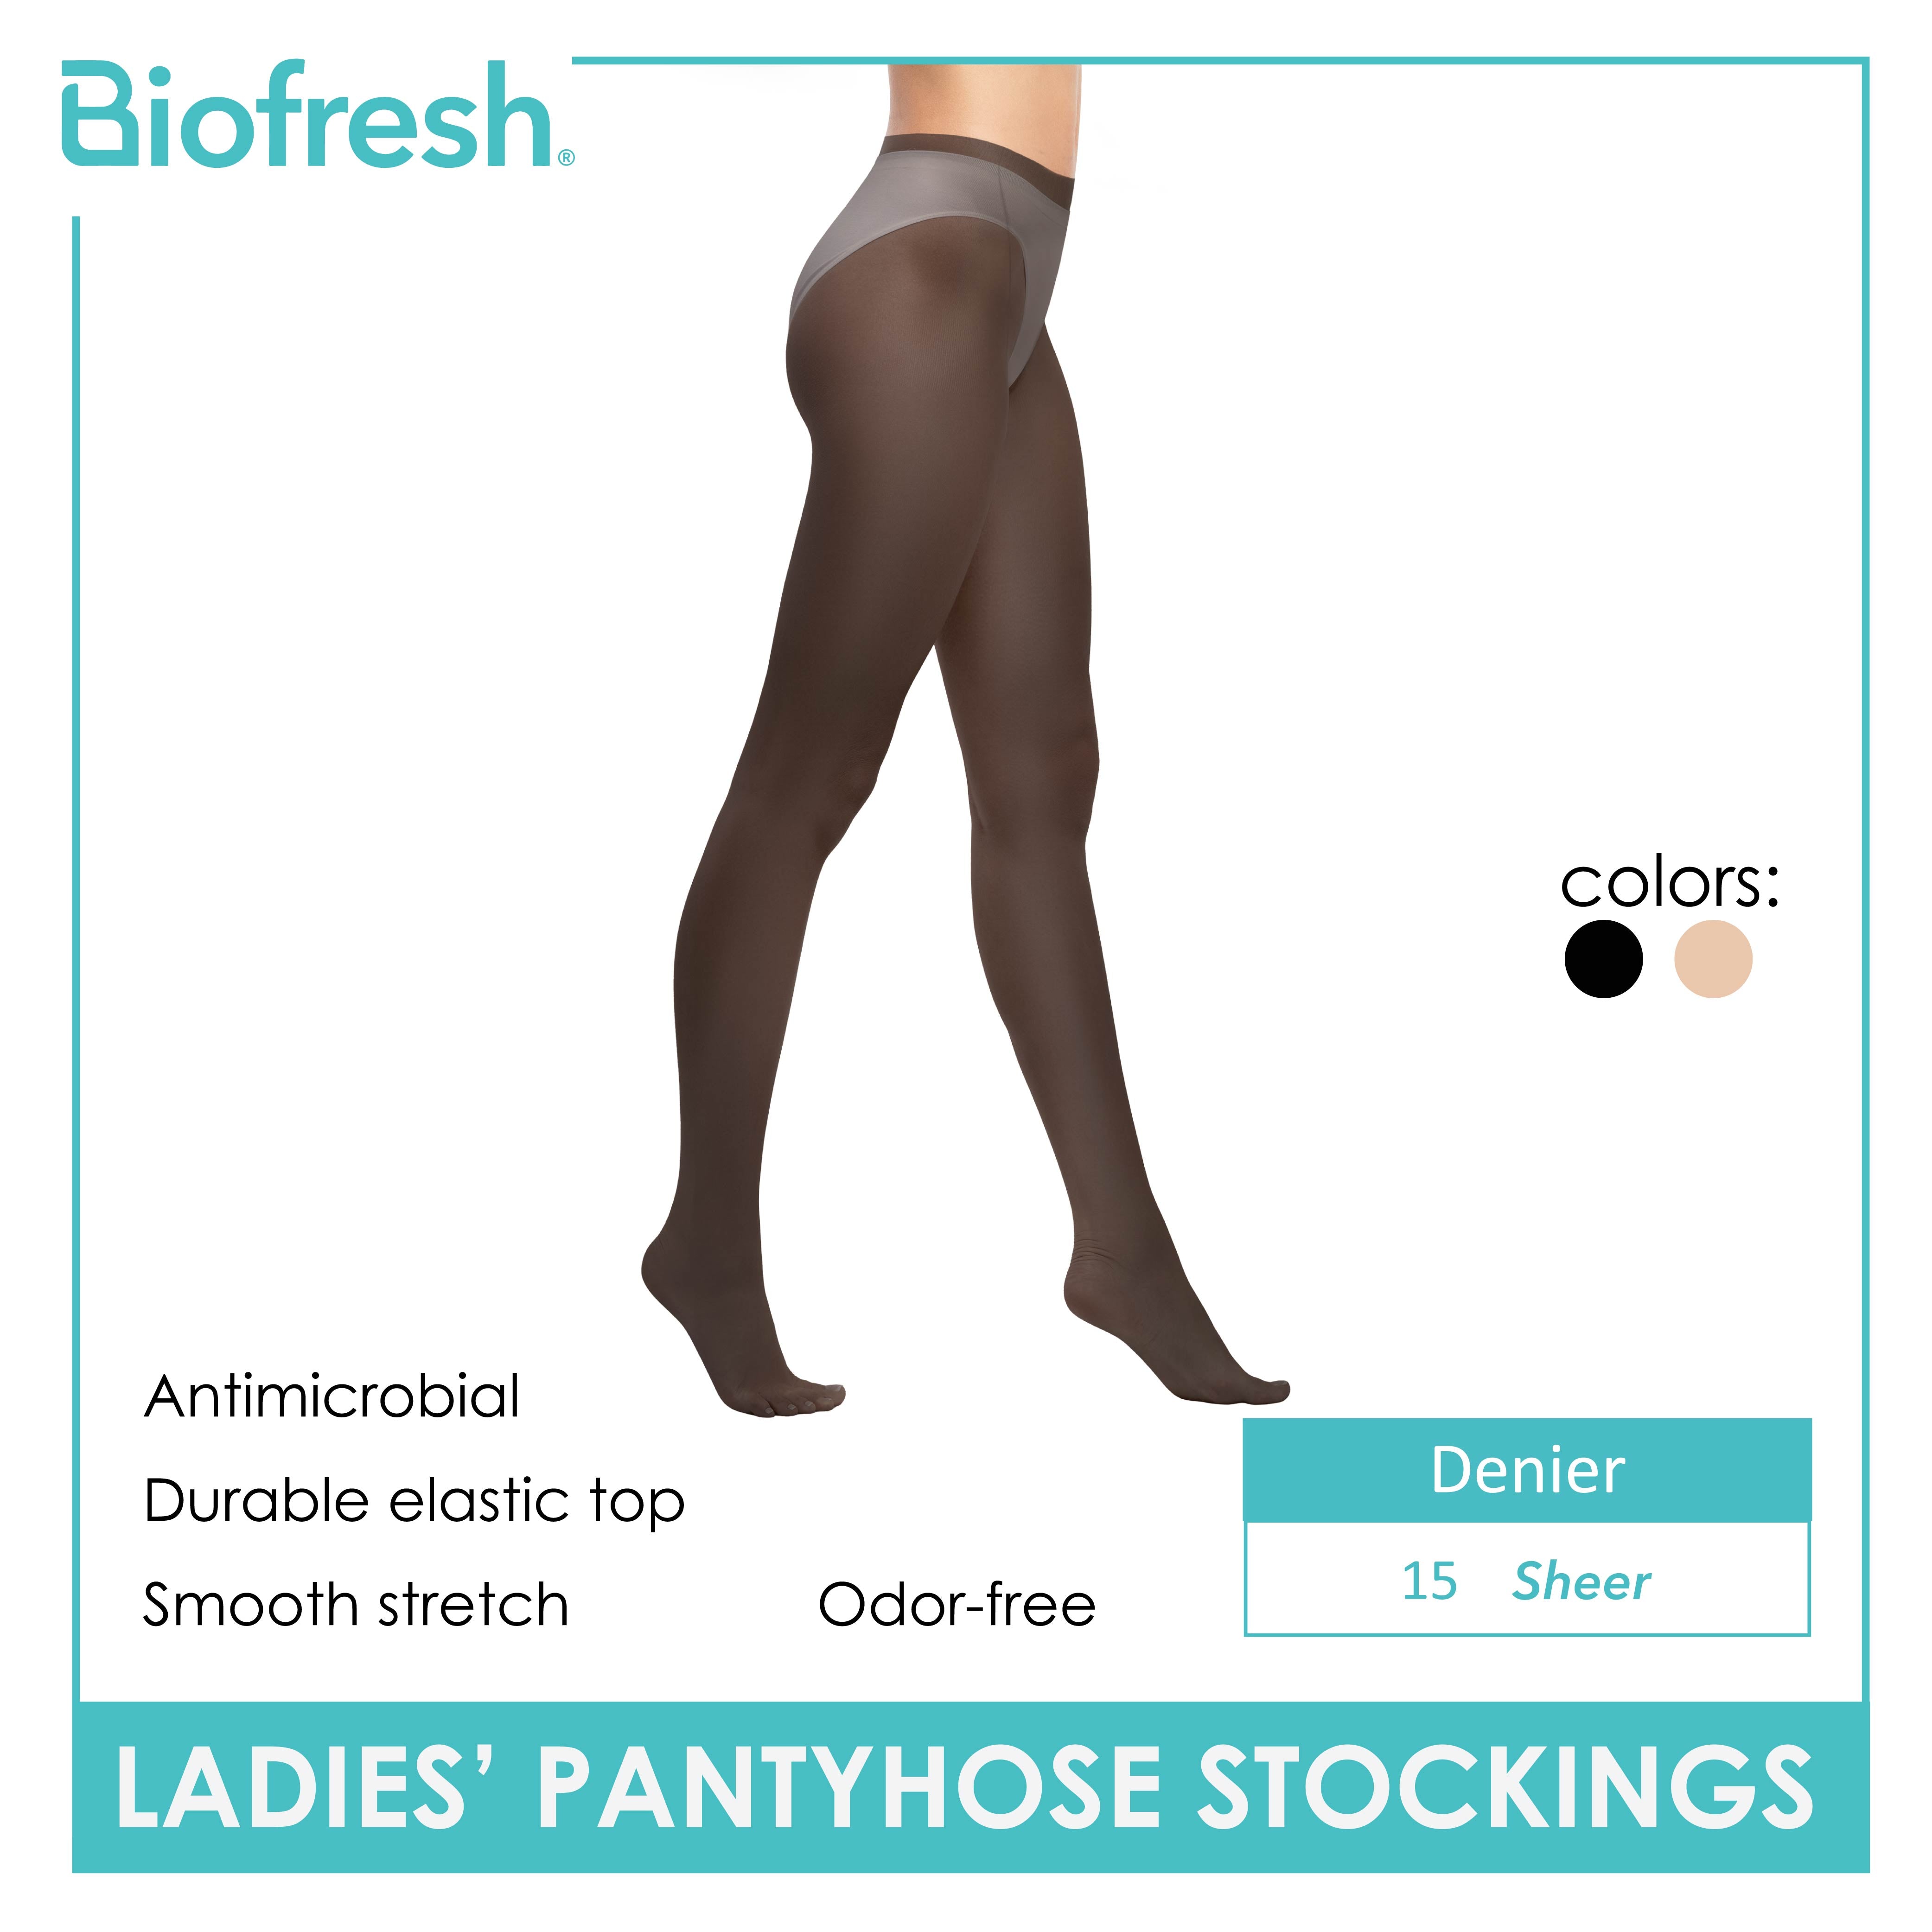 Light Support Panty Hose Stockings